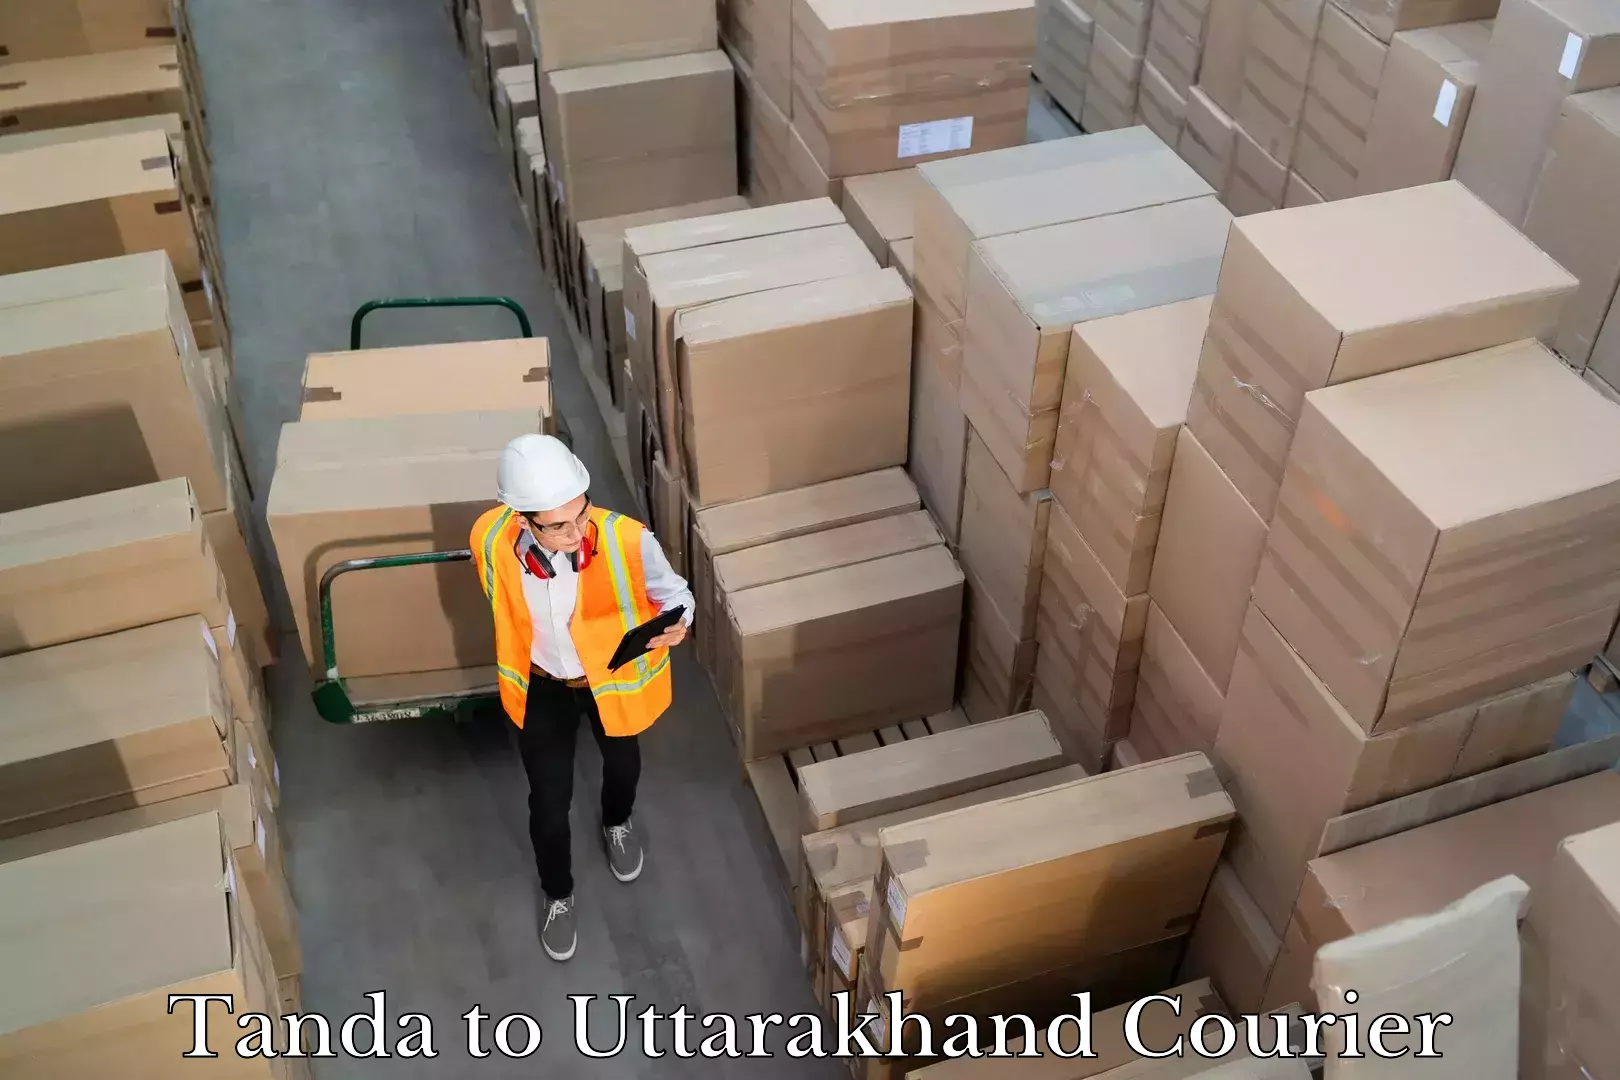 Express delivery network Tanda to Uttarakhand